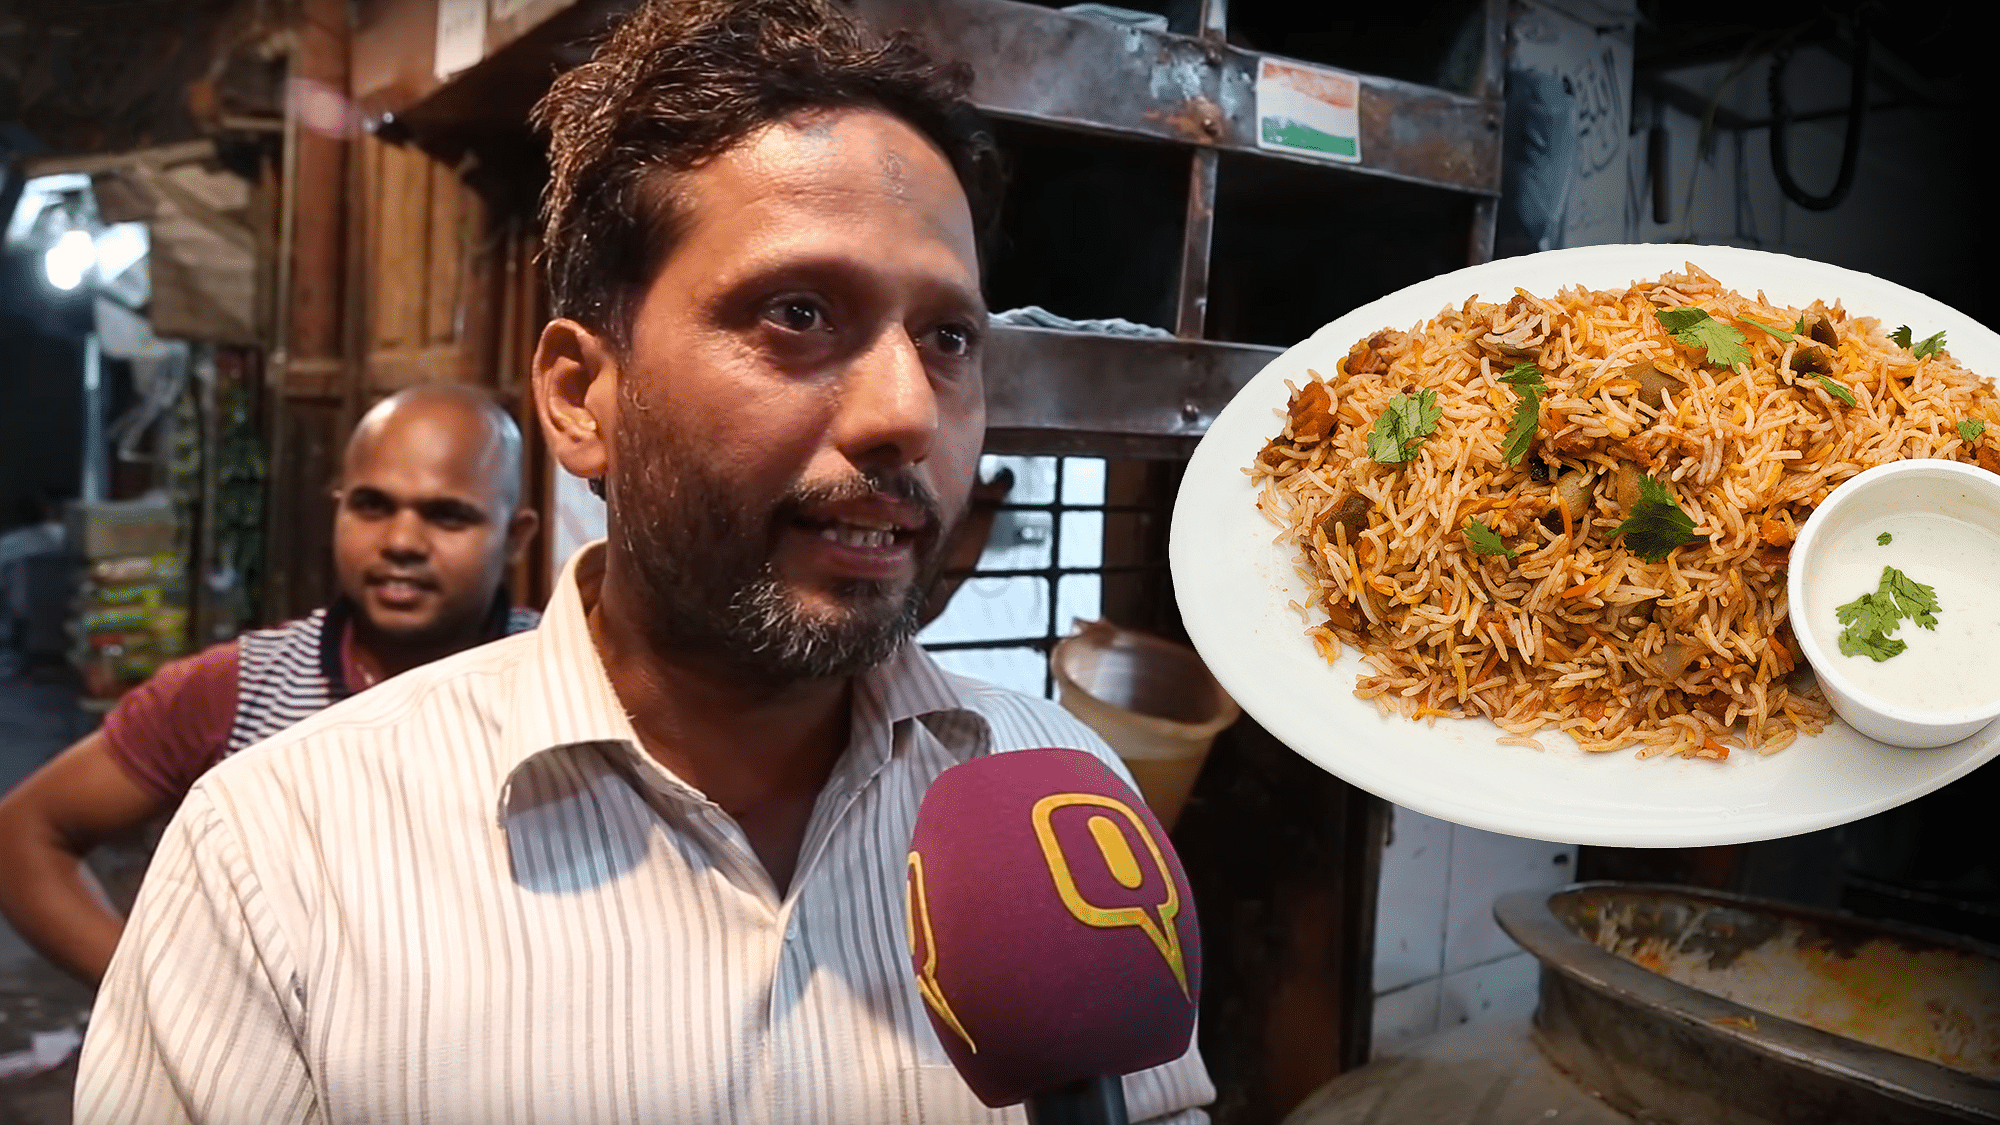 Purani Dilli has something important to say on the Beef Biryani controversy. (Photo: <b>The Quint</b>)